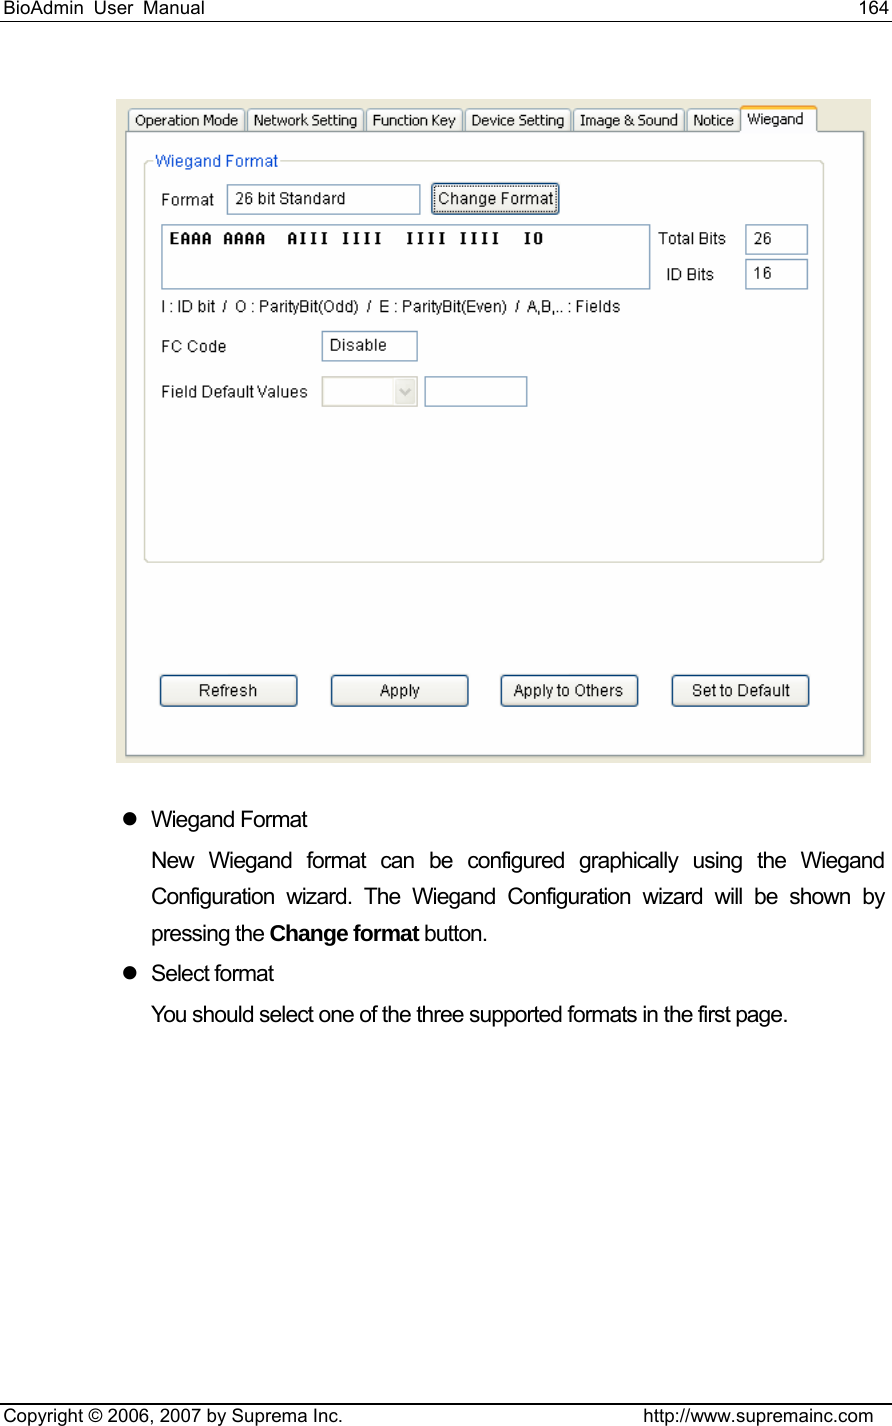 BioAdmin User Manual                                                                     164   Copyright © 2006, 2007 by Suprema Inc.                                http://www.supremainc.com  z Wiegand Format New Wiegand format can be configured graphically using the Wiegand Configuration wizard. The Wiegand Configuration wizard will be shown by pressing the Change format button. z Select format You should select one of the three supported formats in the first page. 